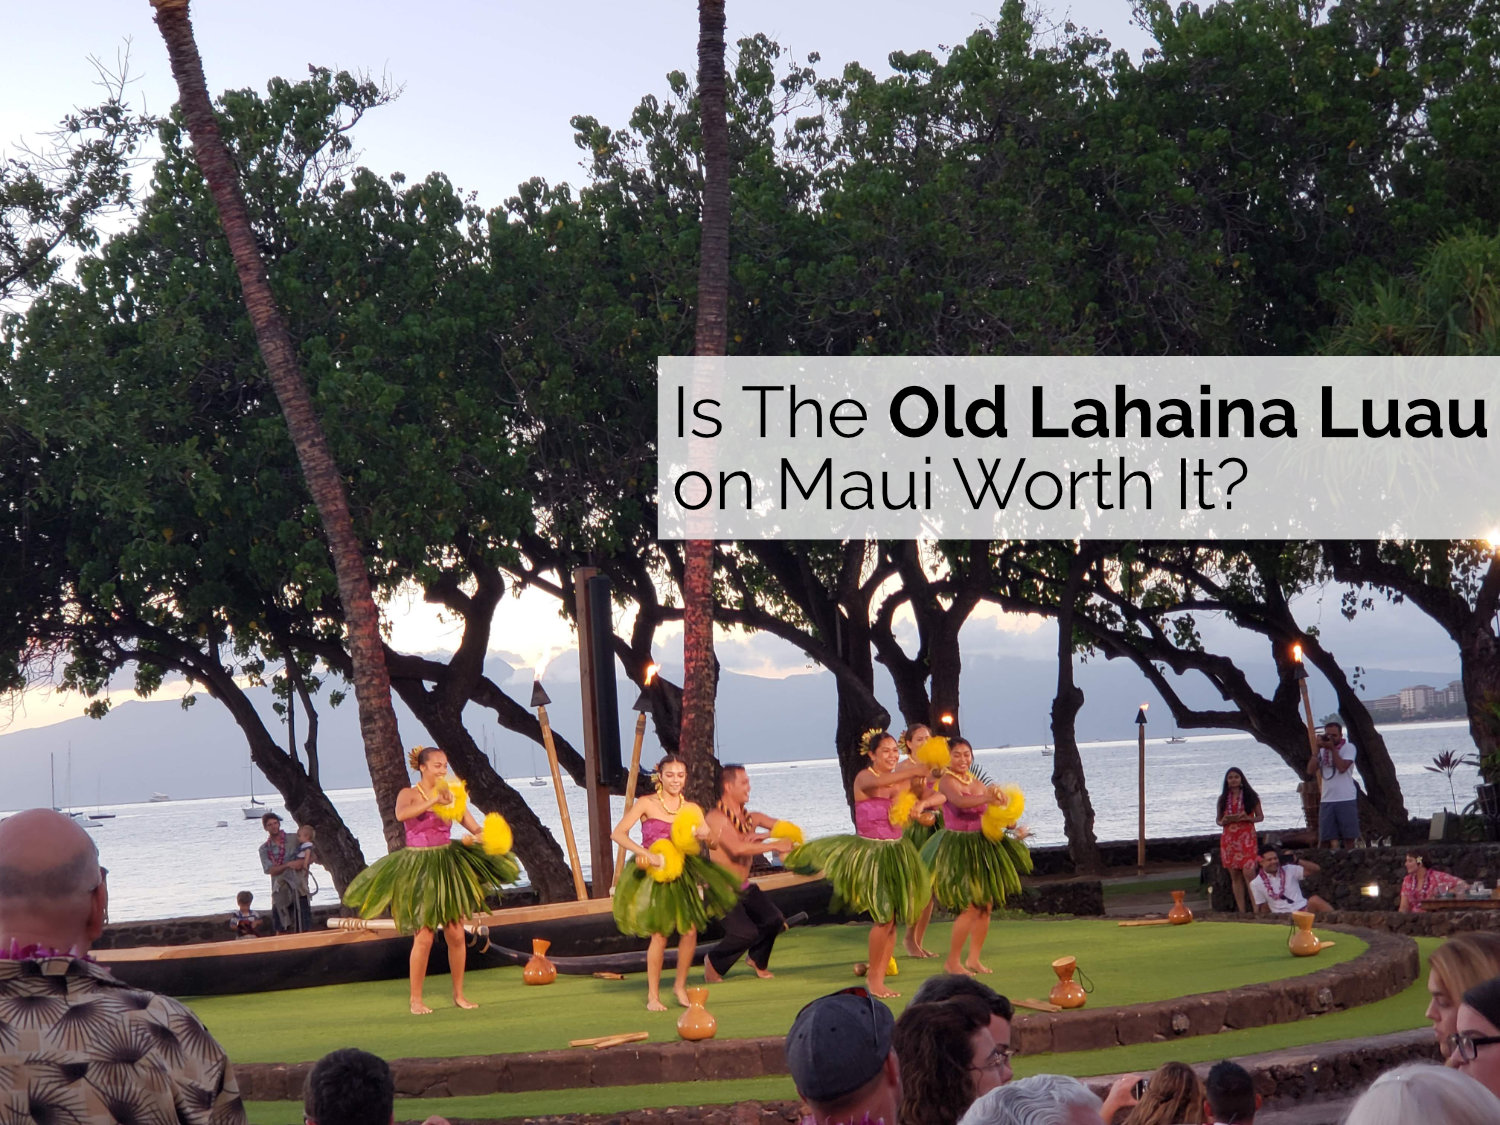 Is it worth it to go to a luau in Maui?